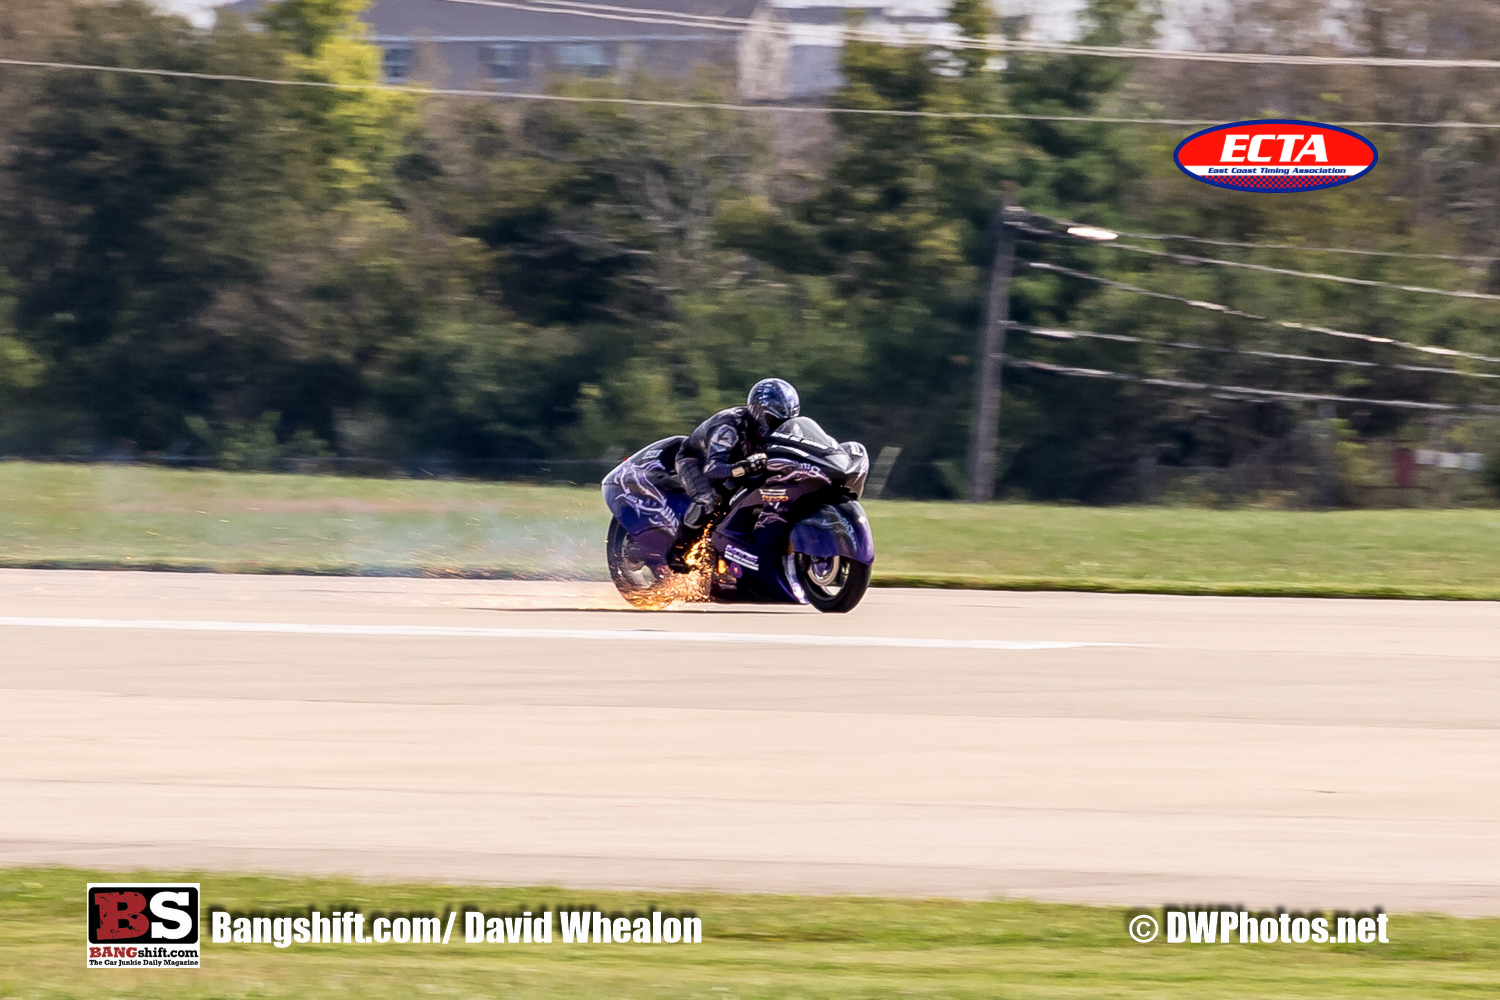 ECTA Land Speed Racing Coverage: Action Photos From The Last Ever Race At The Ohio Mile